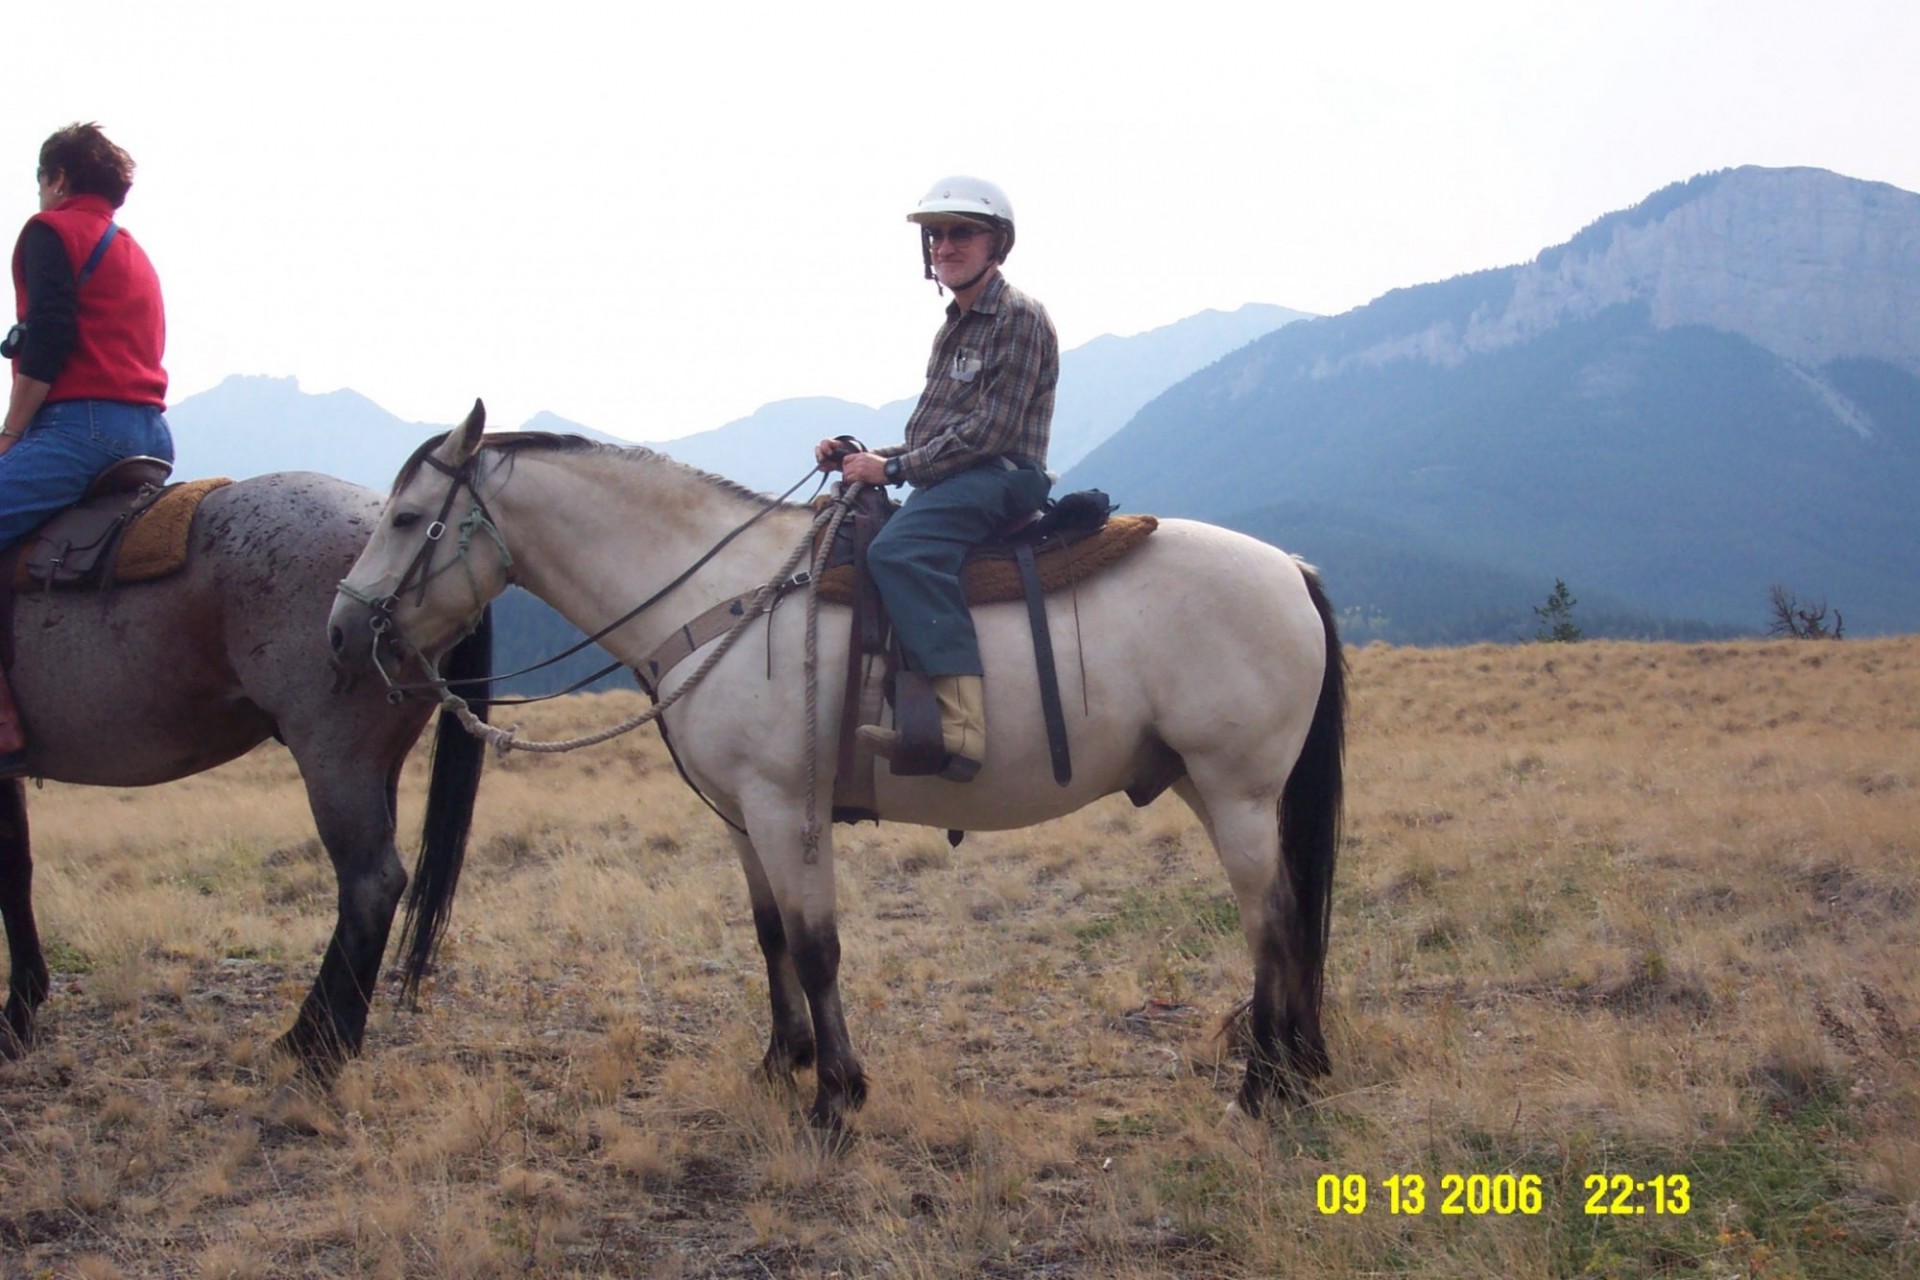 Stephen H. Unger on horseback on a grassy plain, a mountain in the background